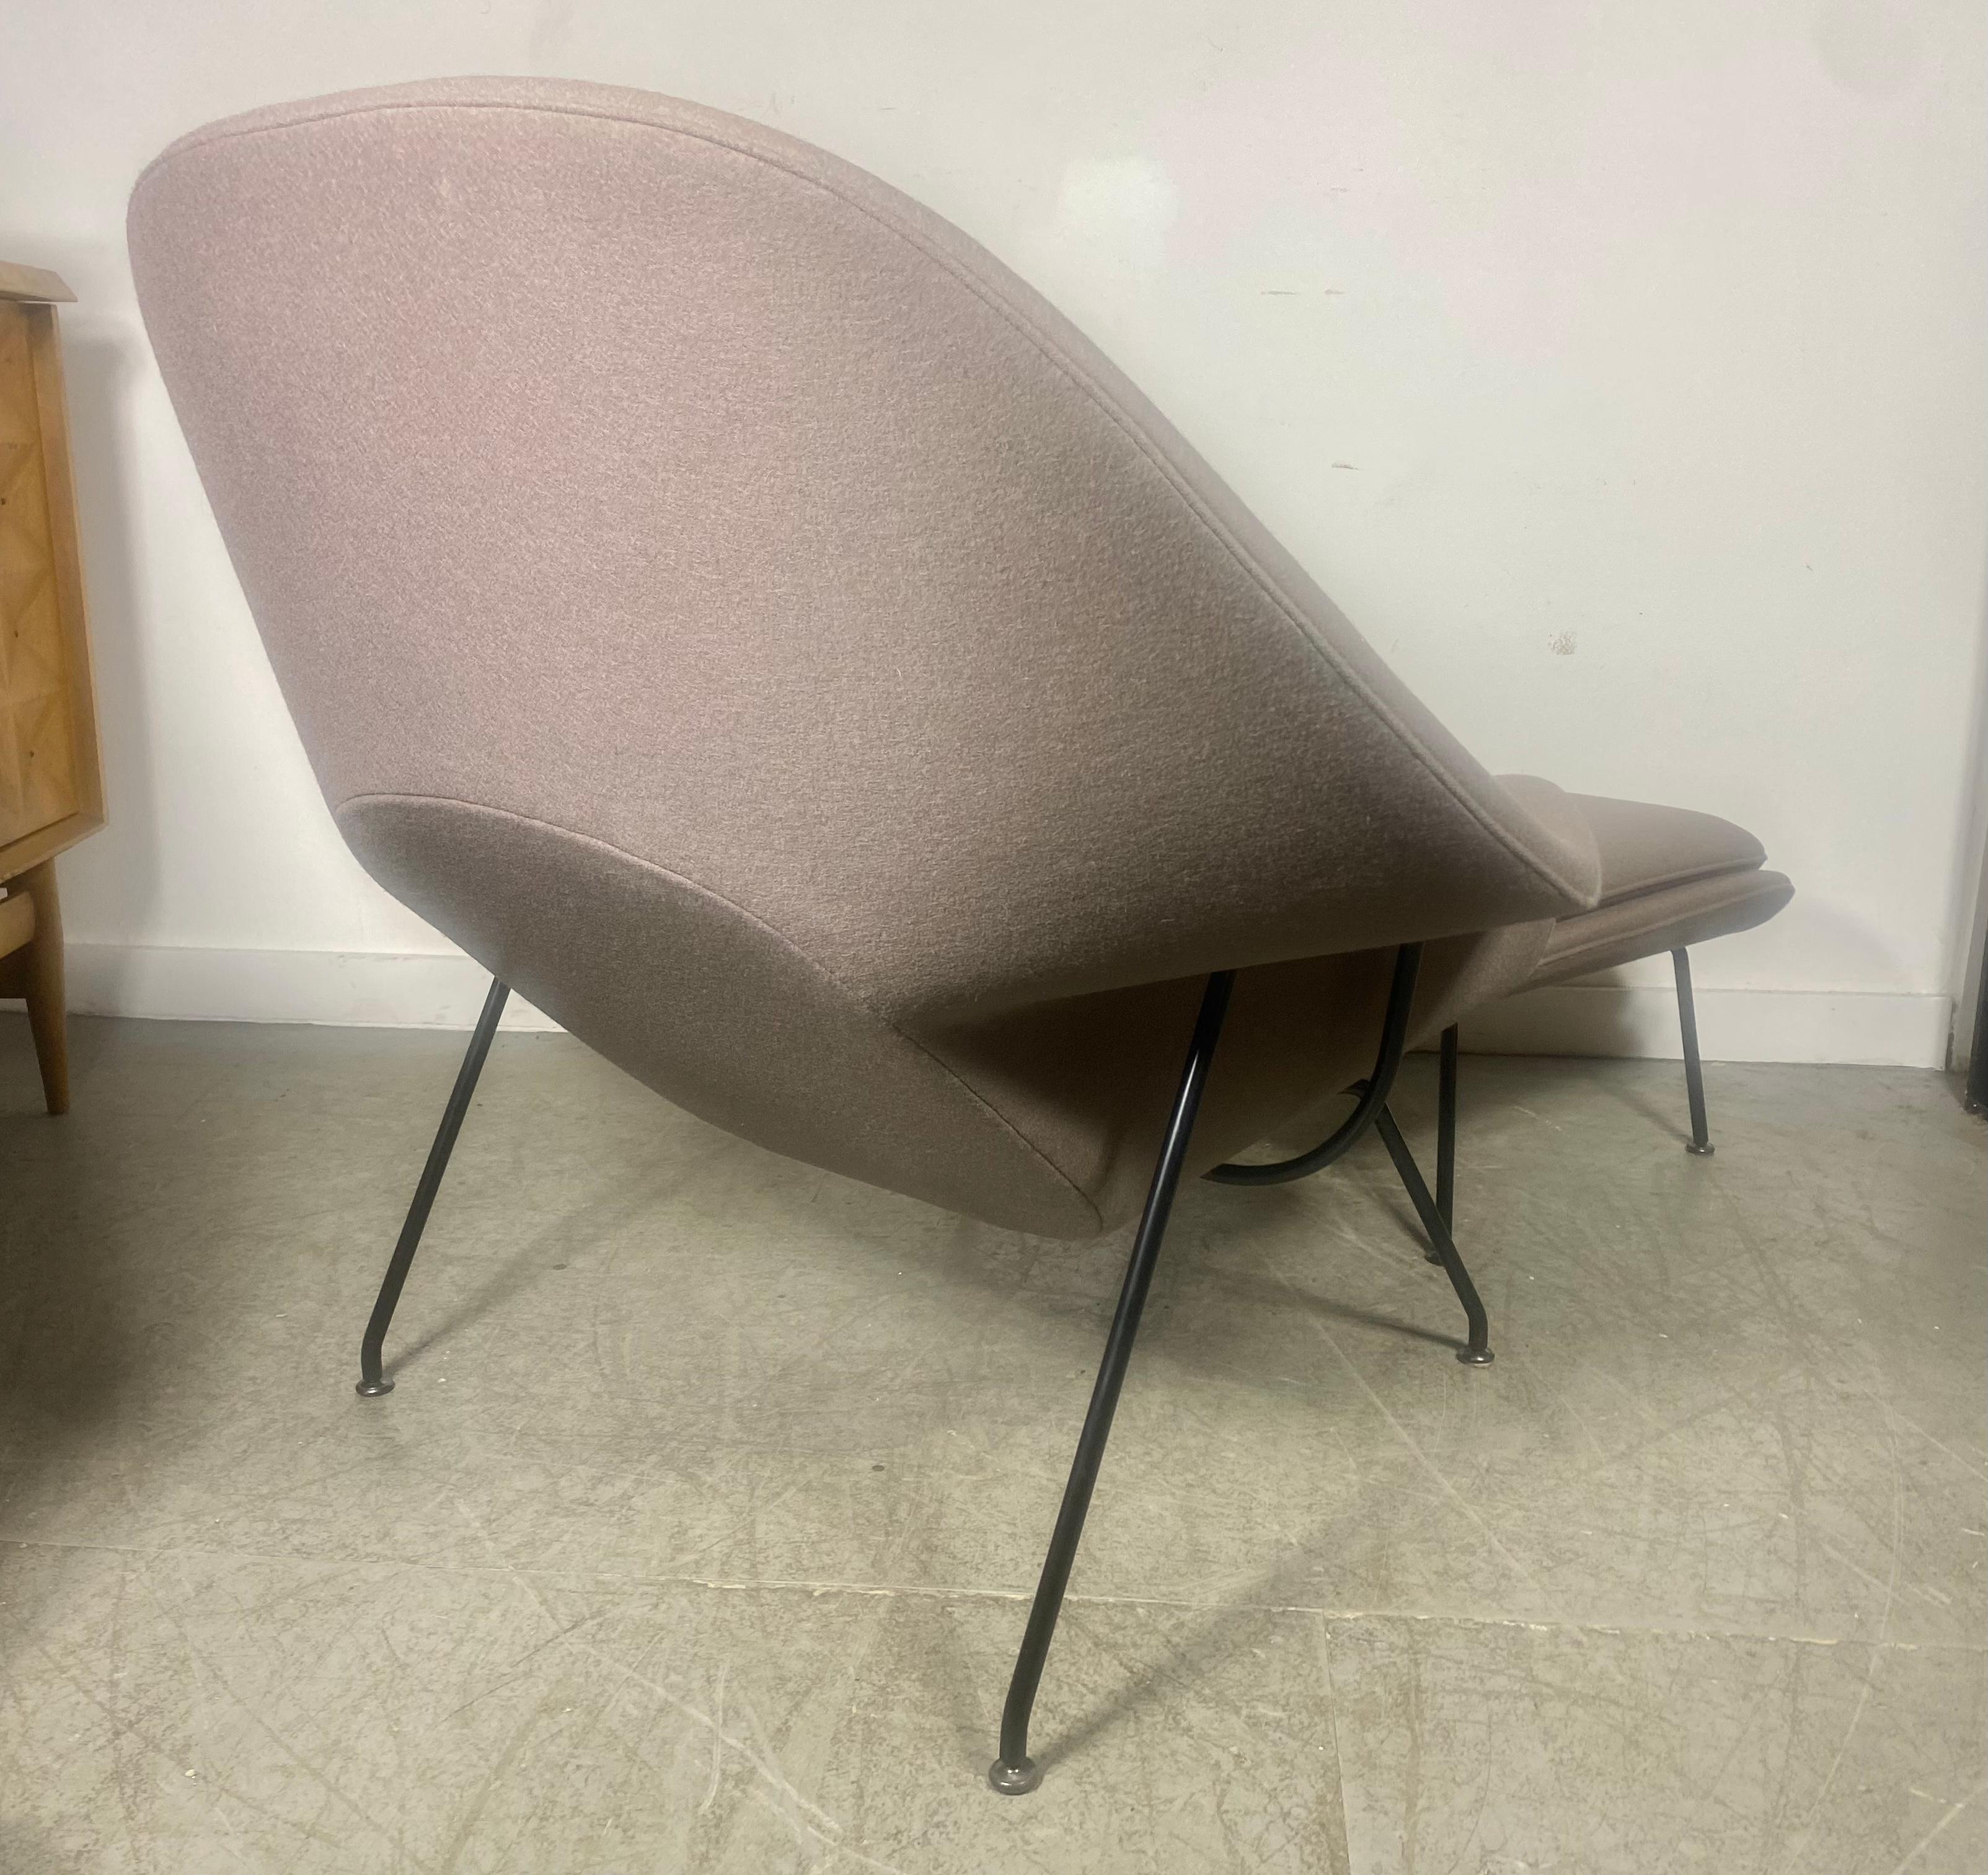 Custom Modernist KNOLL Womb Chair and Ottoman by Eero Saarinen  In Excellent Condition For Sale In Buffalo, NY